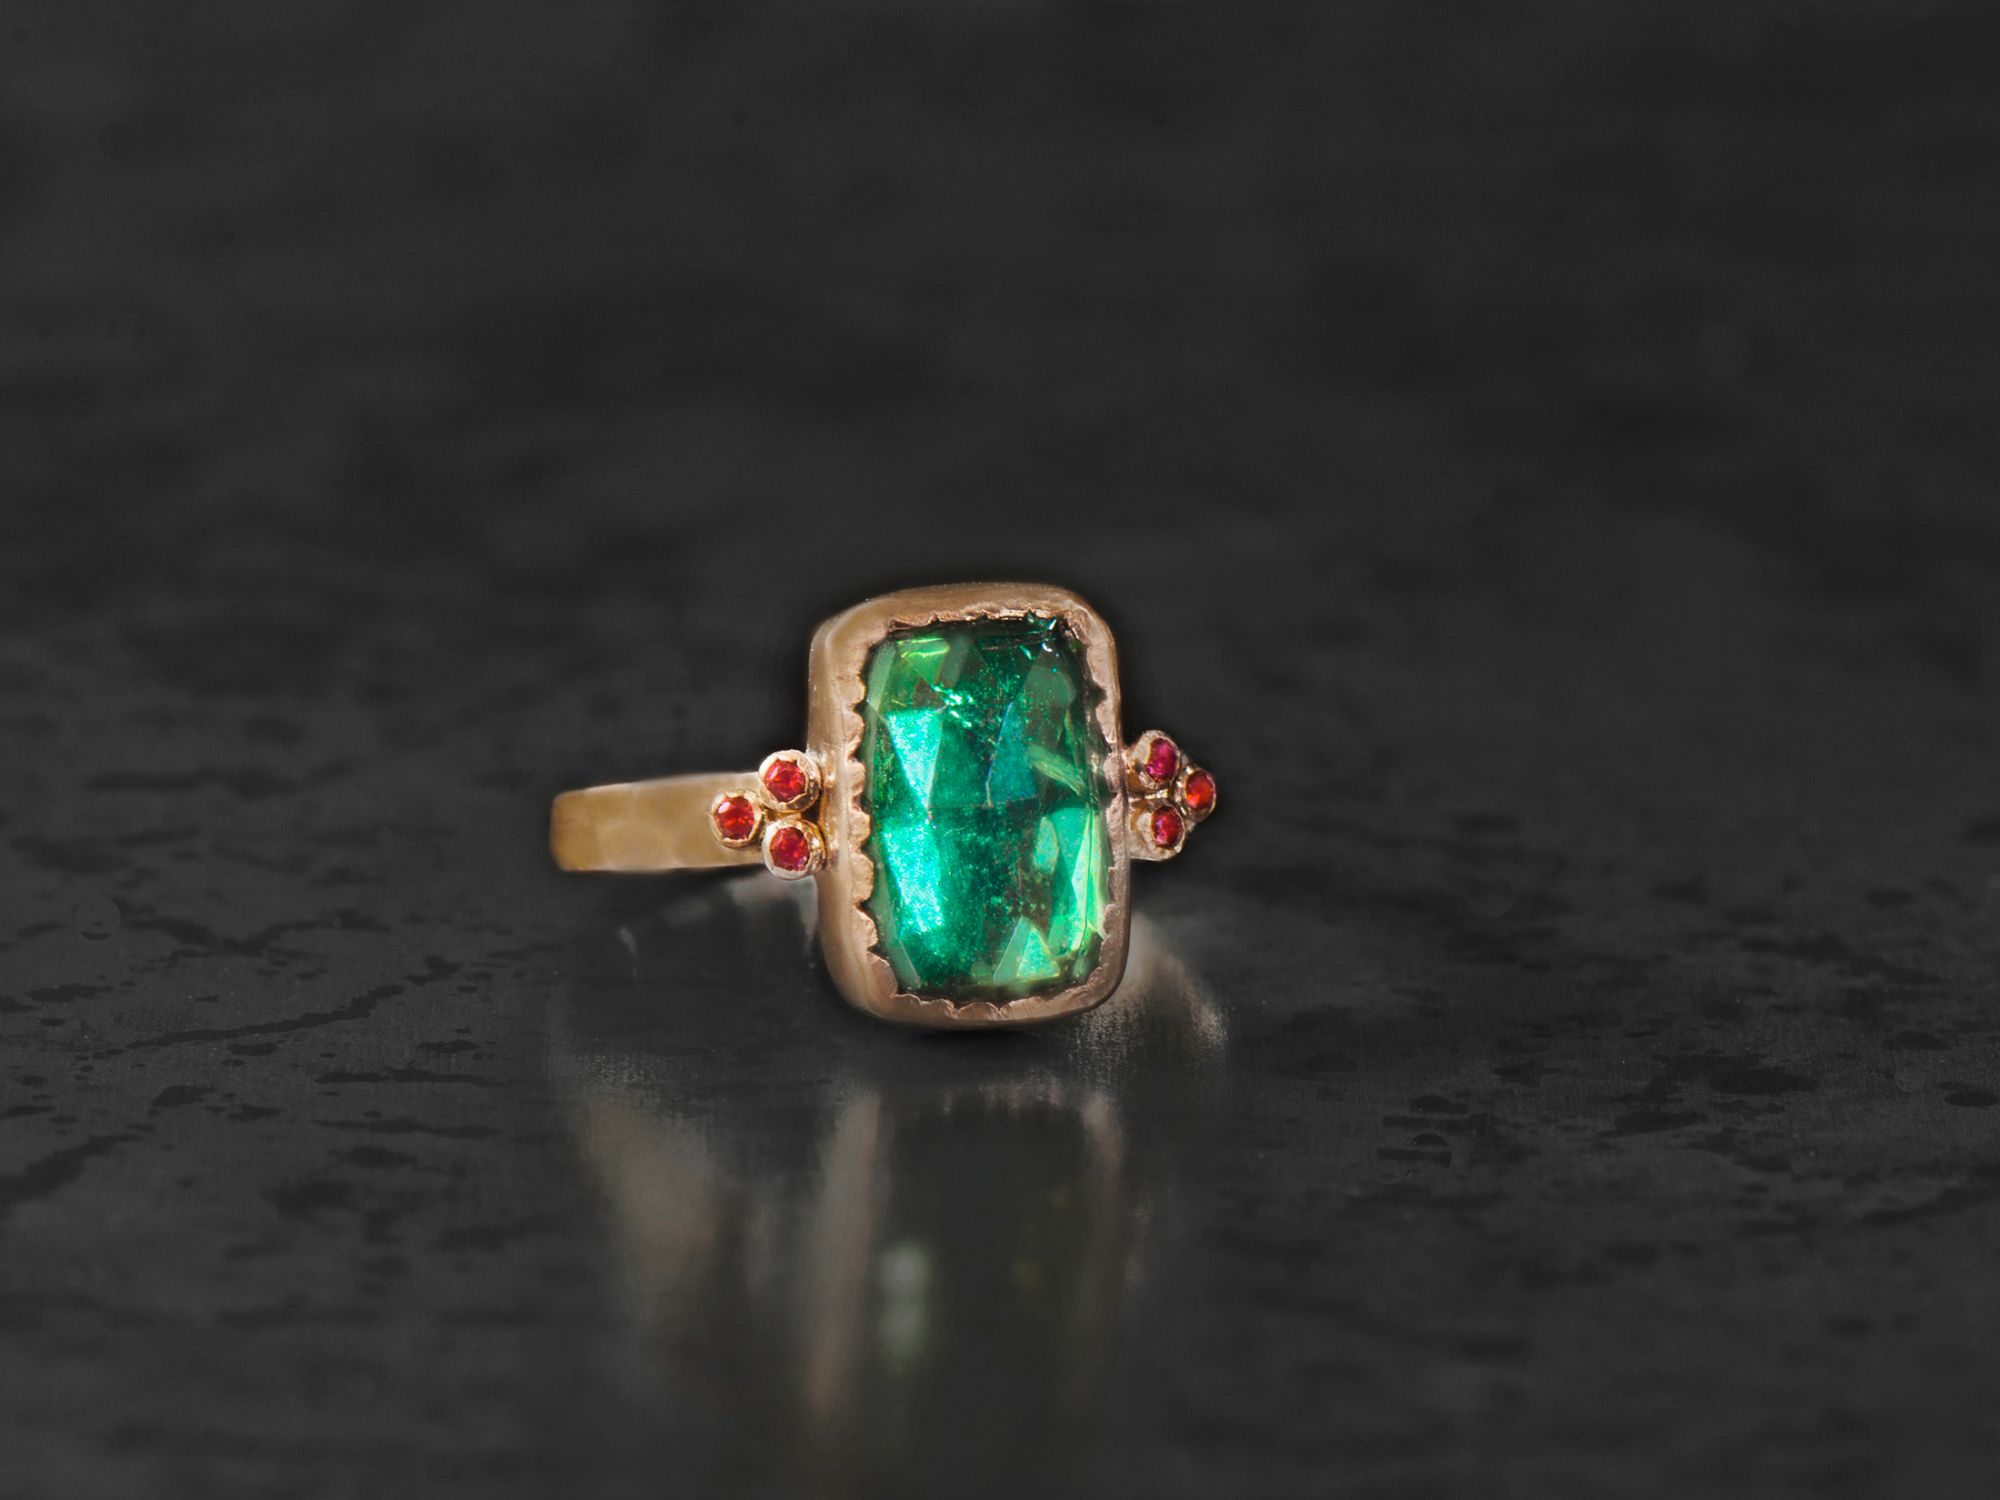 Queen rubies and green tourmaline ring by Emmanuelle Zysman